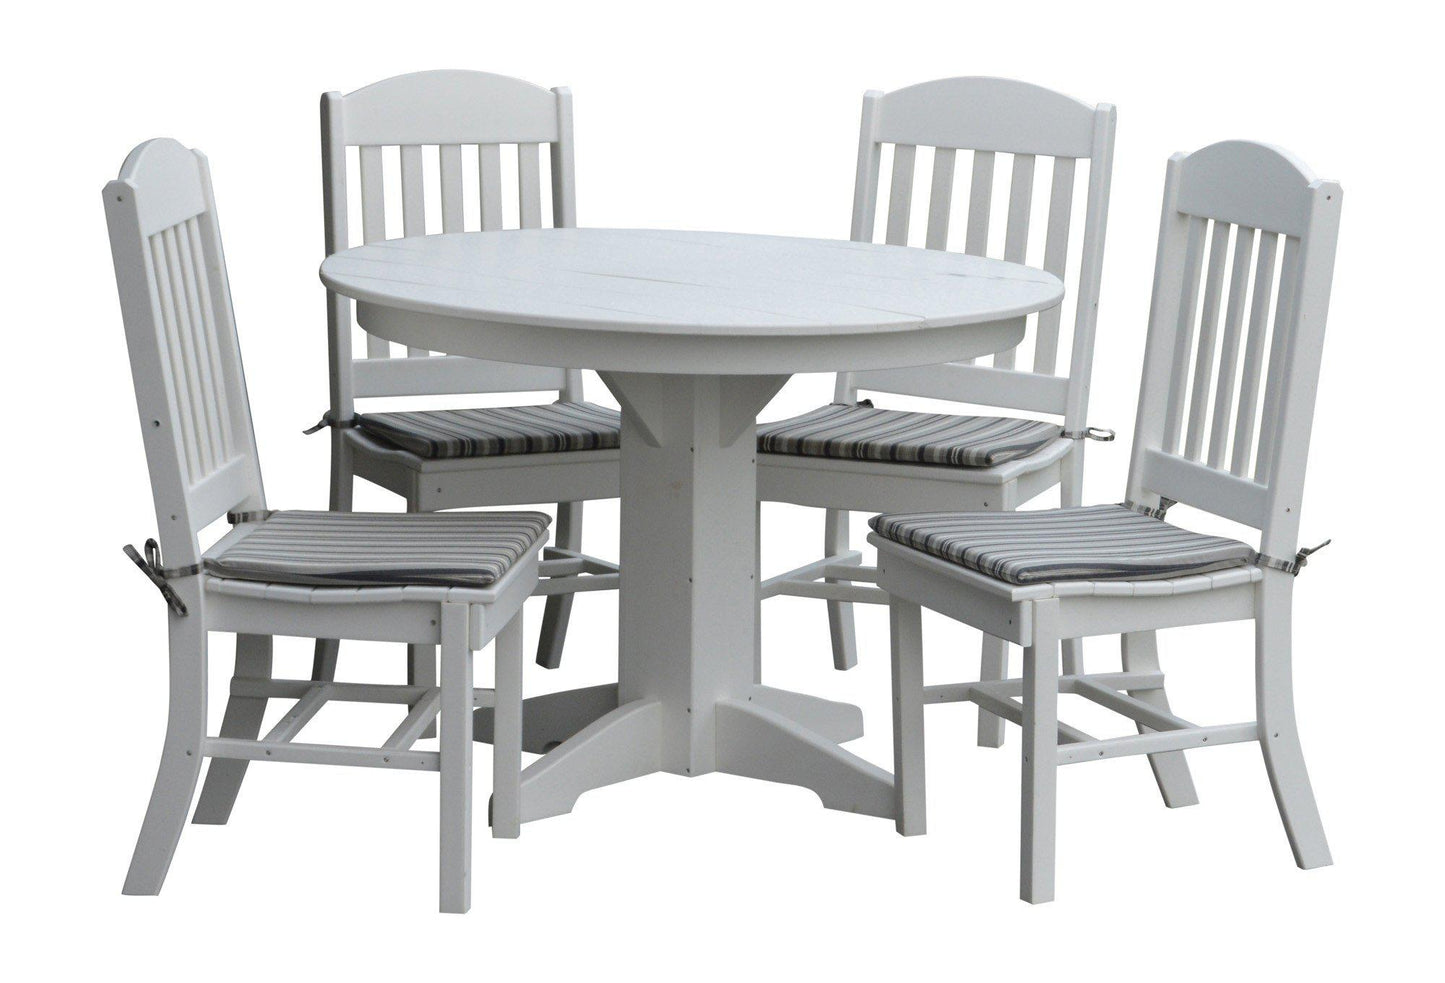 A&L Furniture Recycled Plastic 5 Piece Classic Round Table Dining Set - White